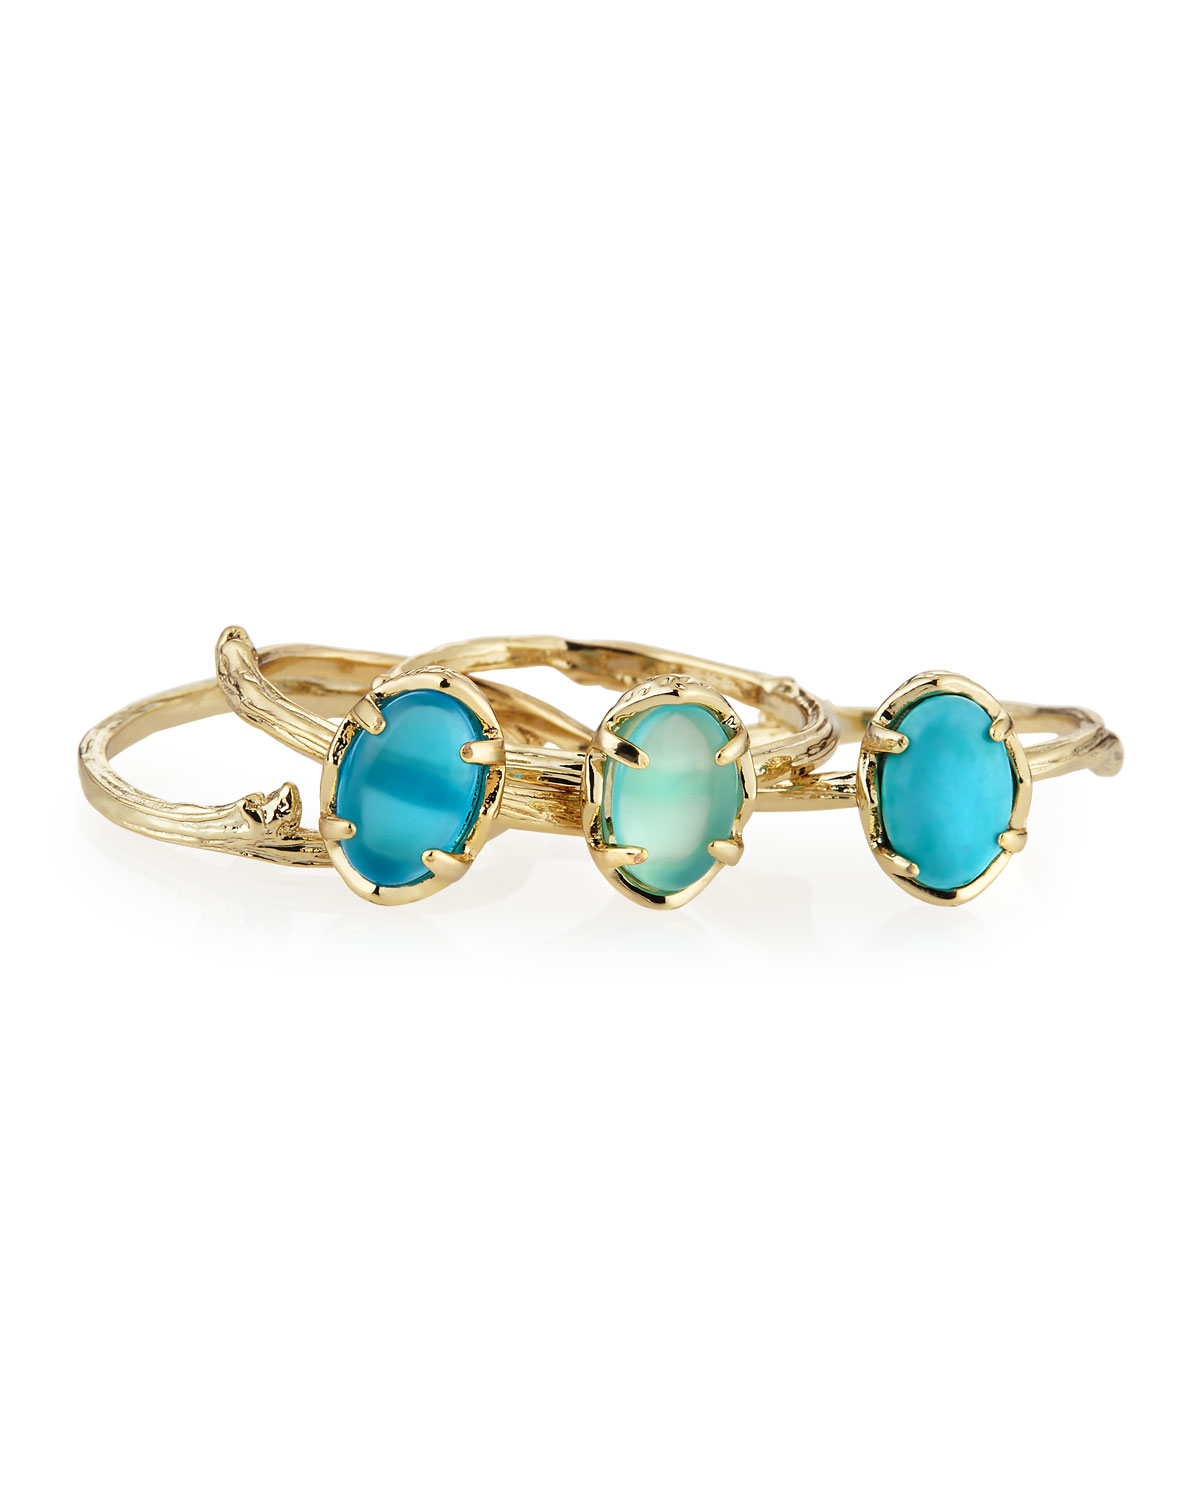 Kendra scott Oval Stacked Stormy Turquoise Ring Size 8 in Blue